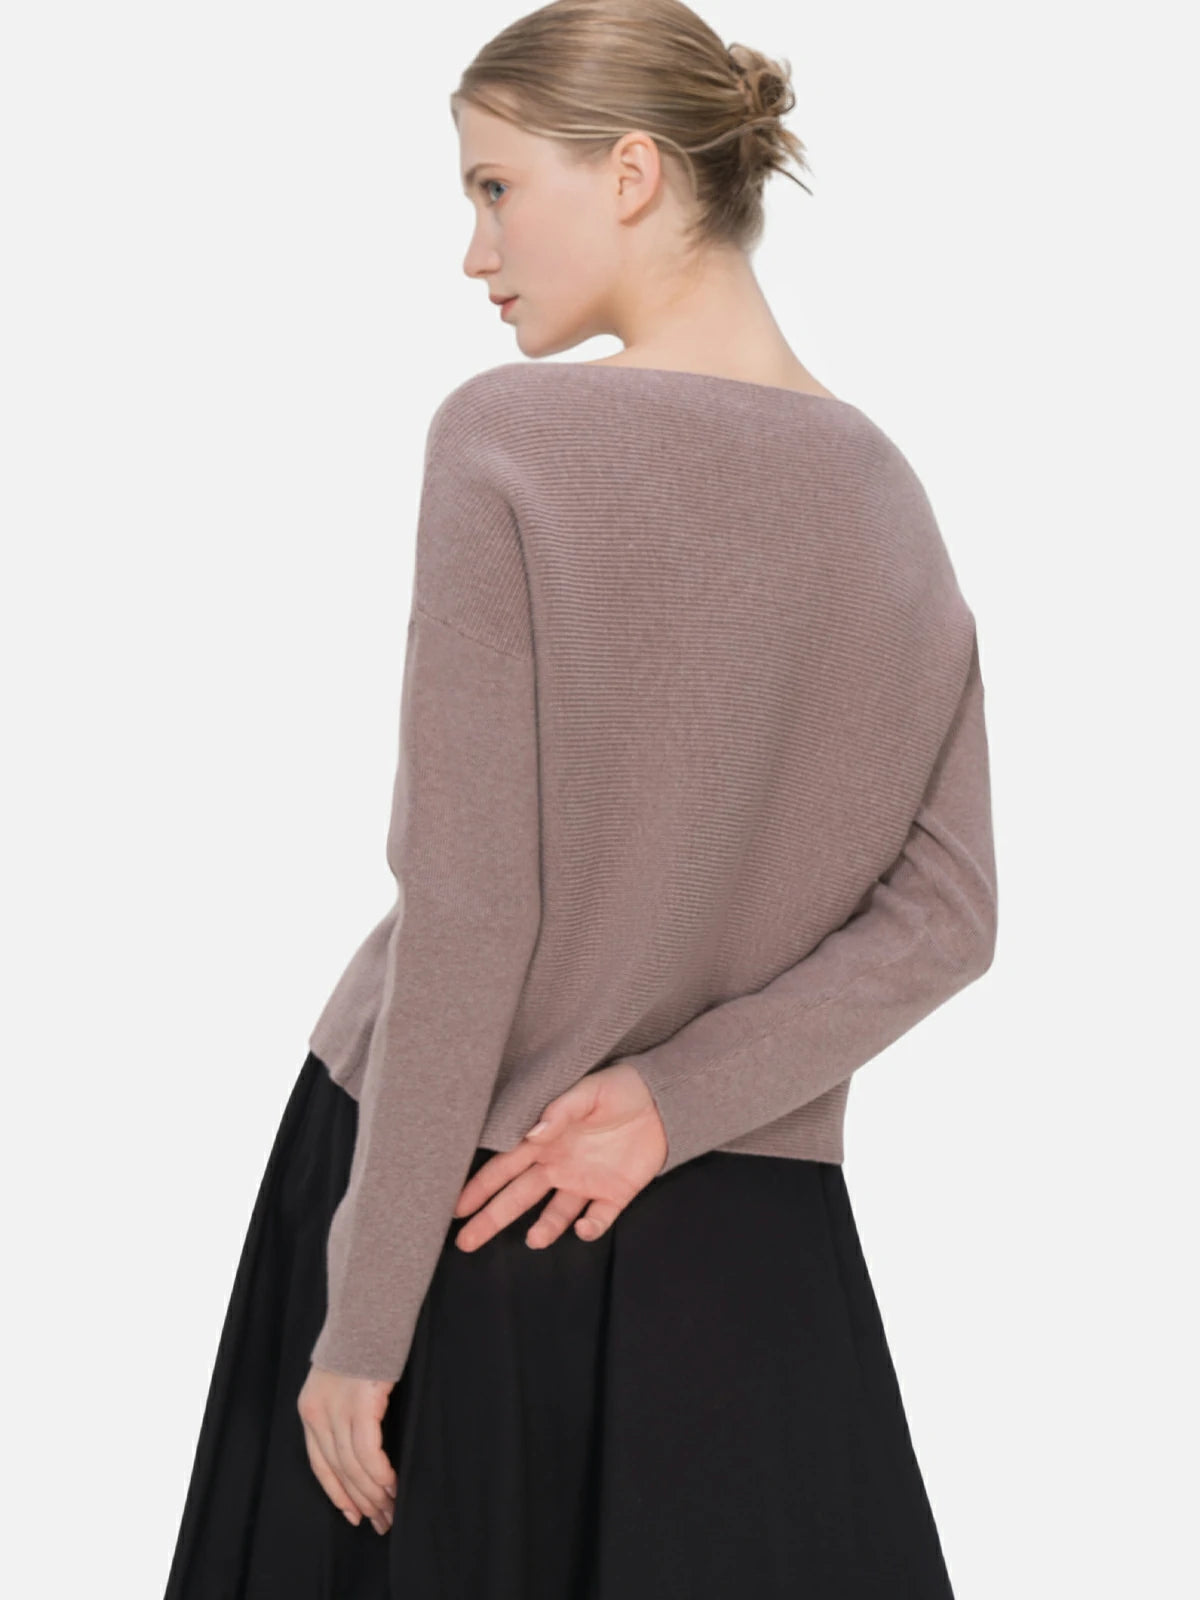 Round-neck sweater providing both warmth and a clean aesthetic